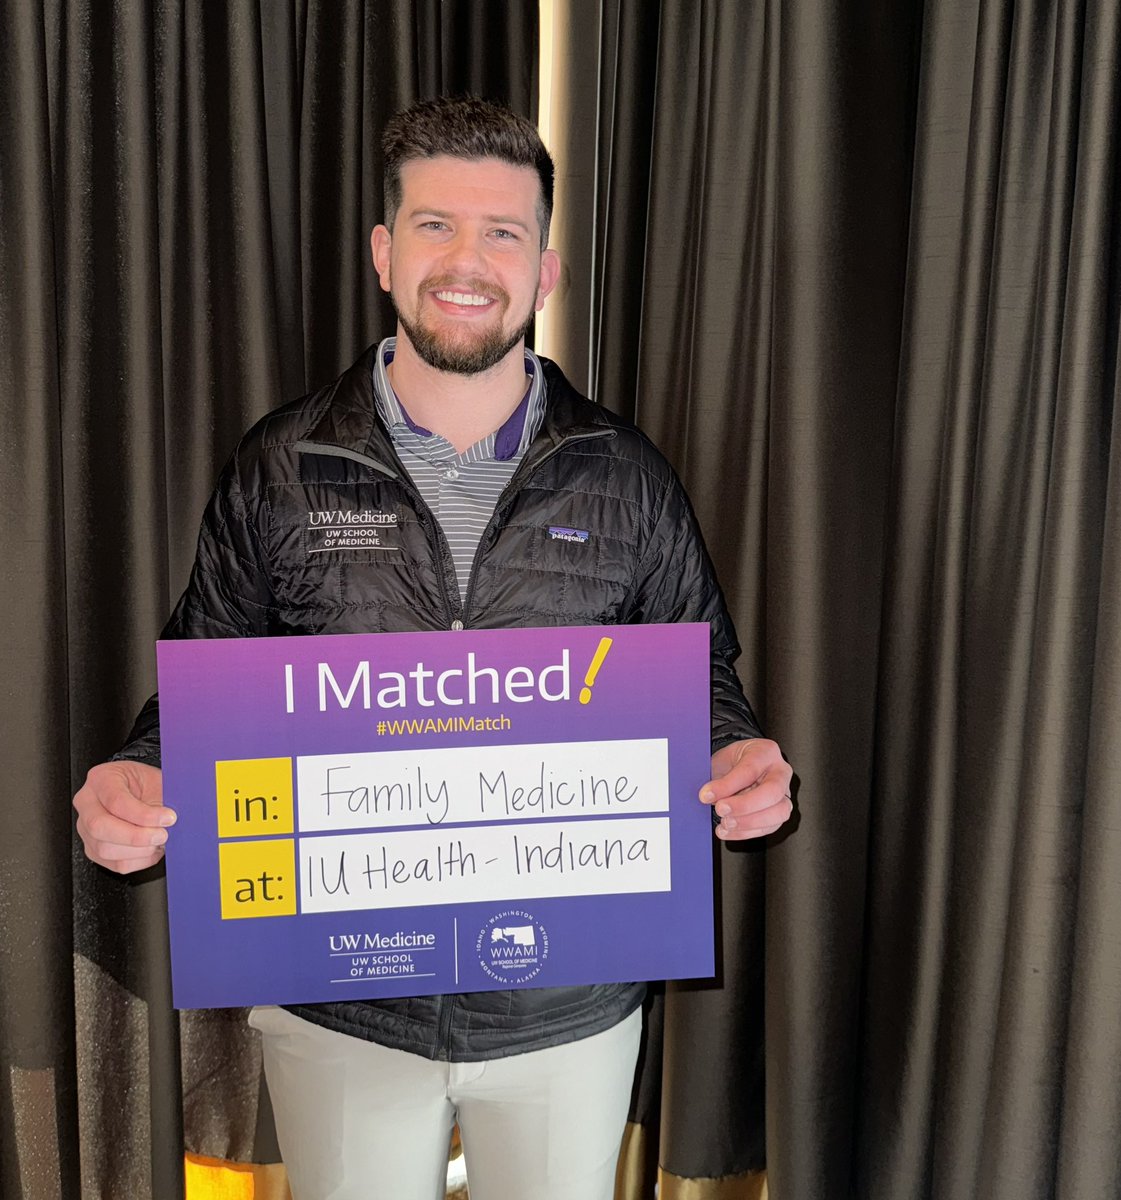 So stoked to be graduating medical school and heading to start residency as a family med physician at my number one pick in Indiana! #aafp #IUHealth #Familymedicine #Match2024